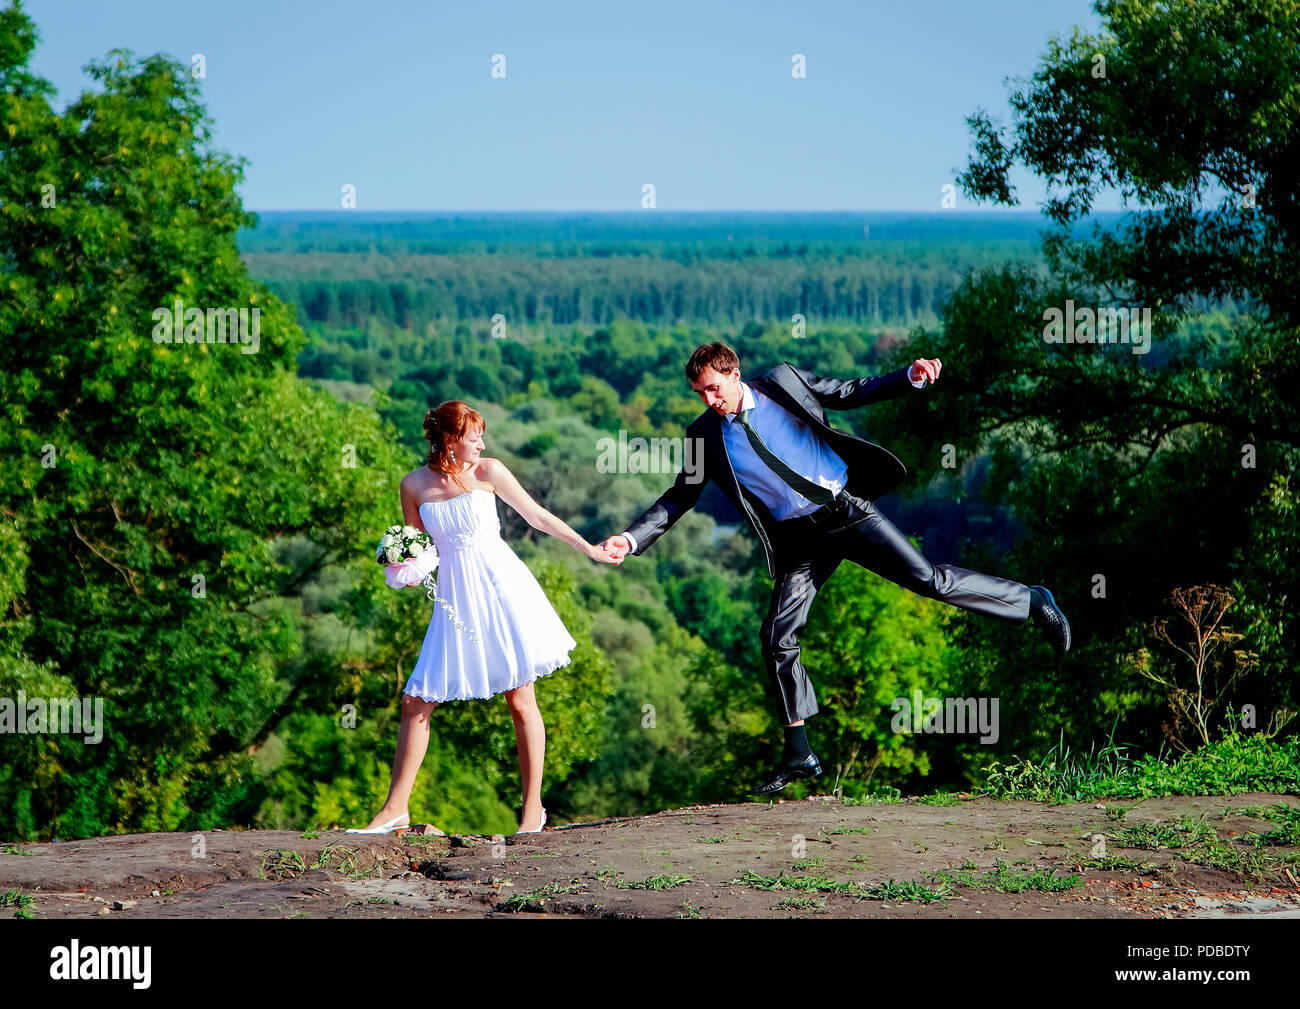 08.08.2018 Russia, Bryansk. Bride and groom with a bouquet of flowers in the open air. The groom jumps and hangs in the air. Stock Photo